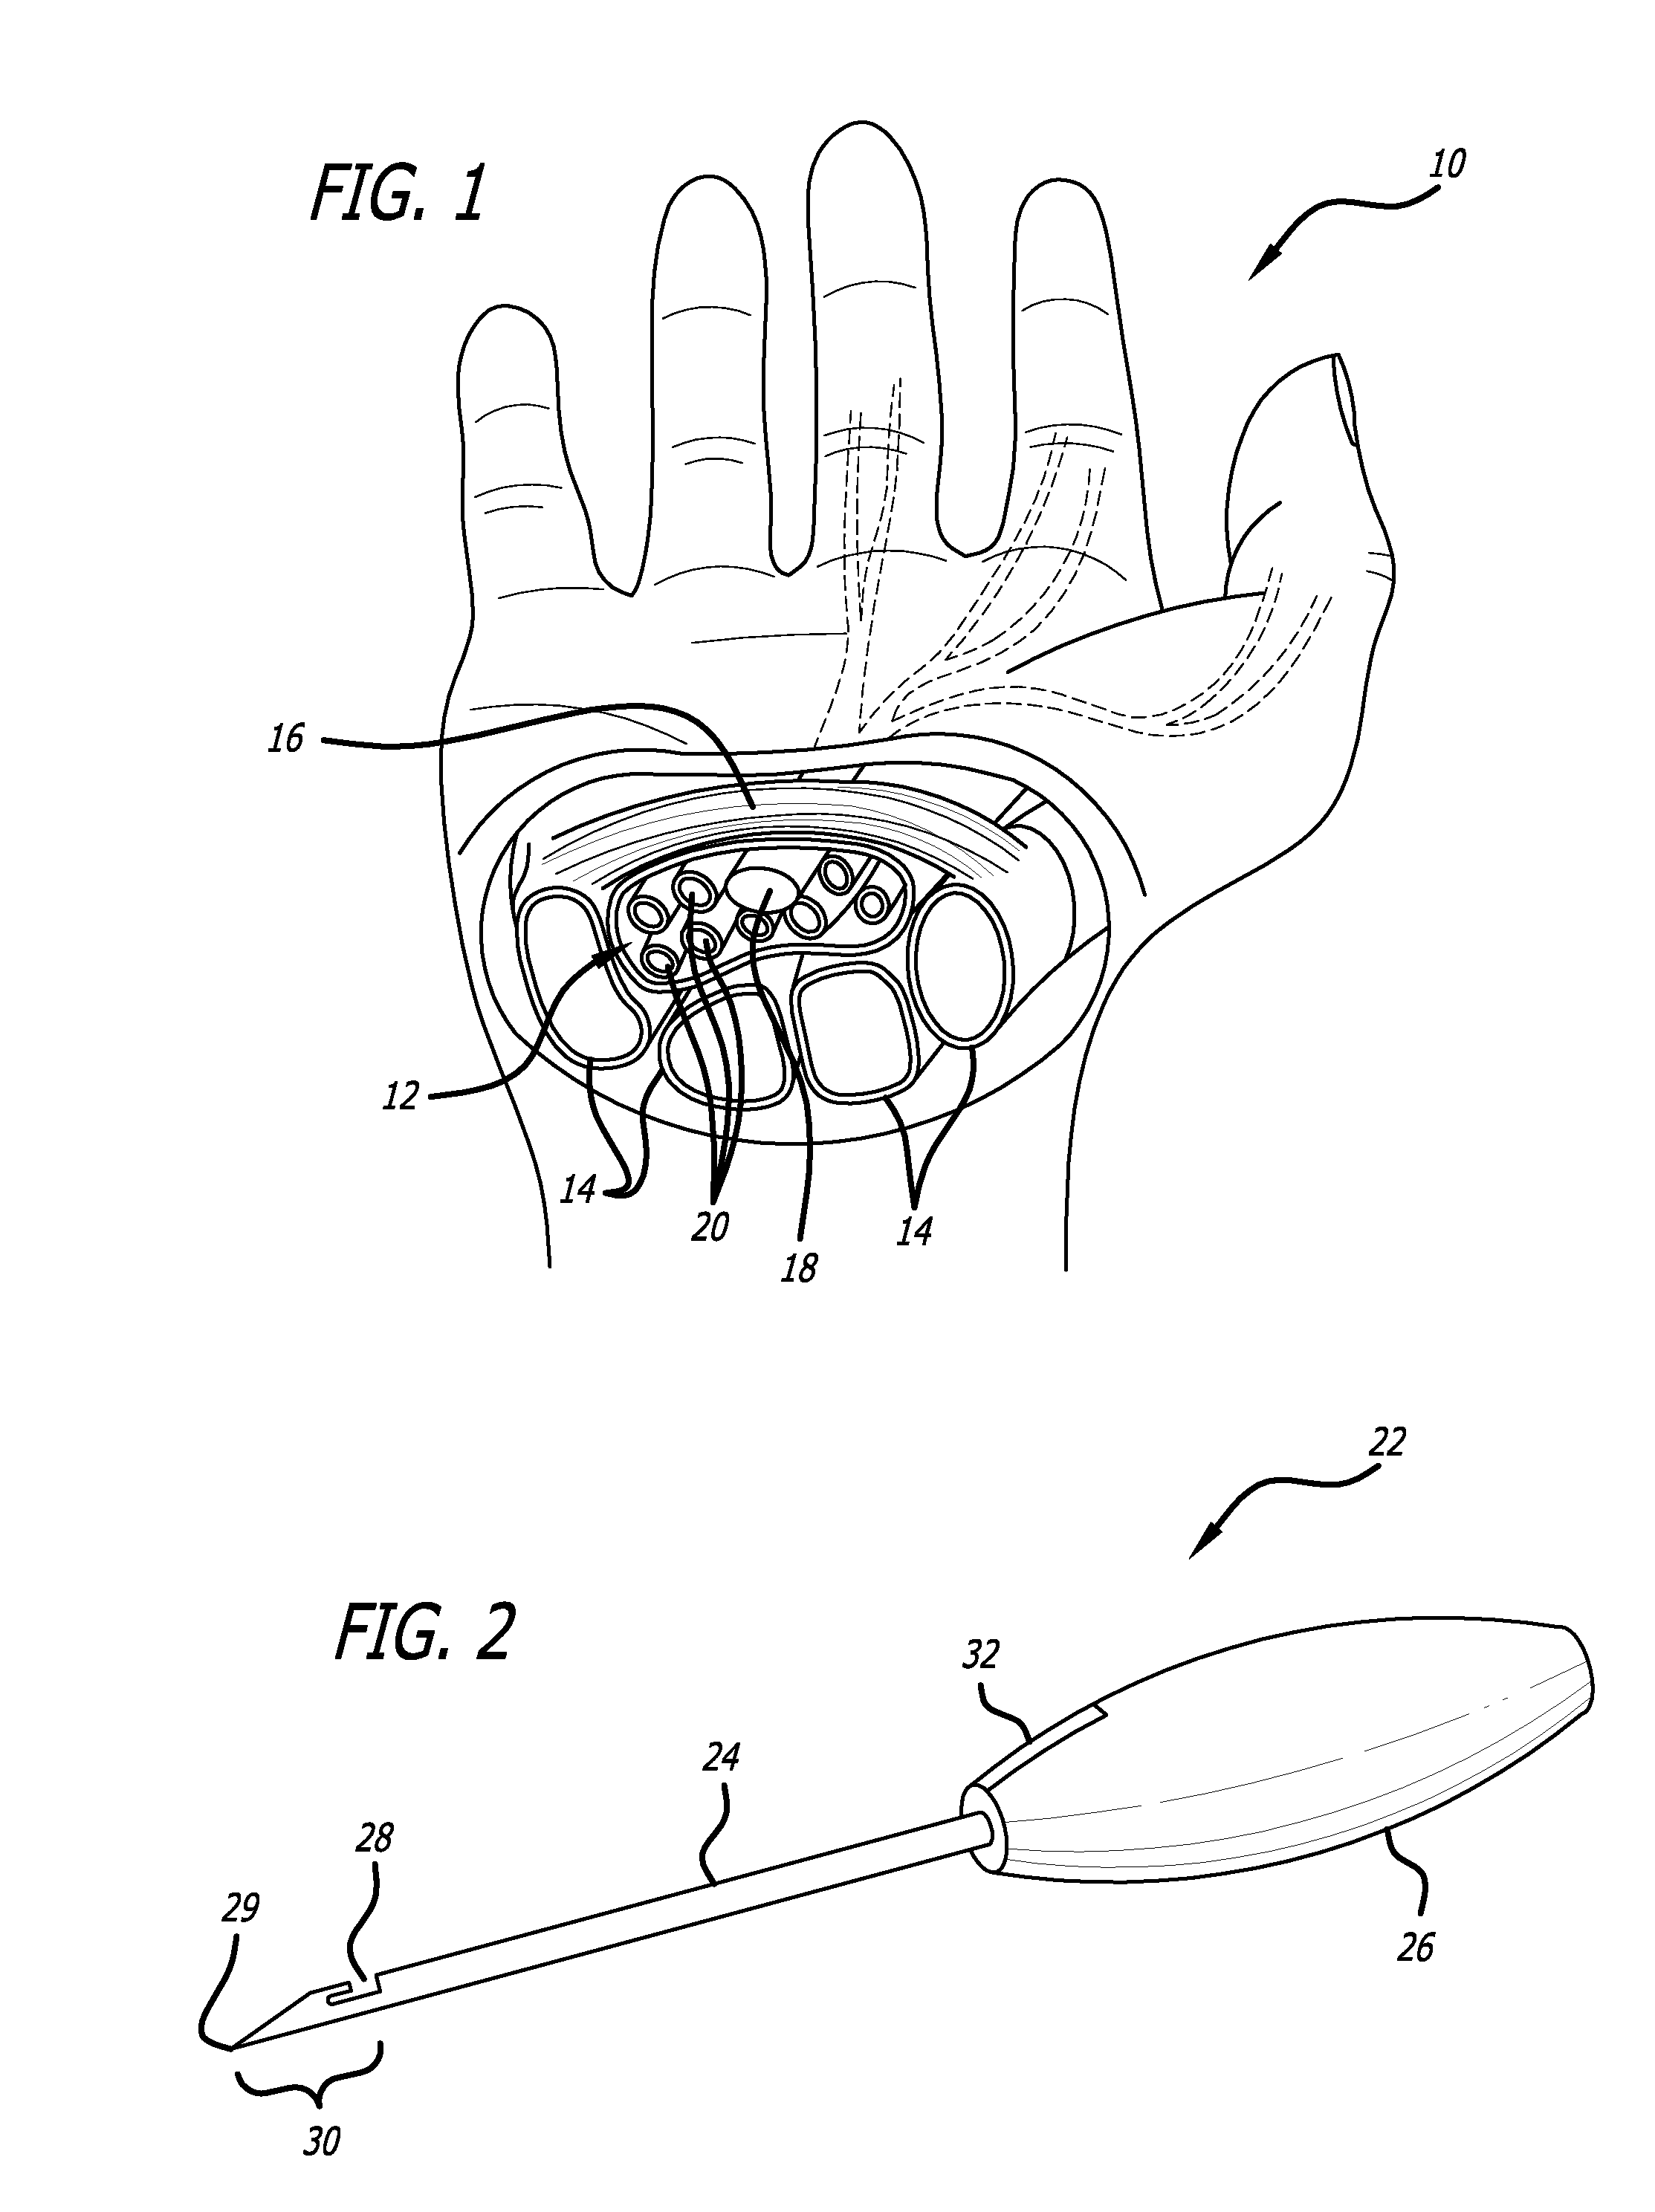 Method and apparatus for thread transection of a ligament